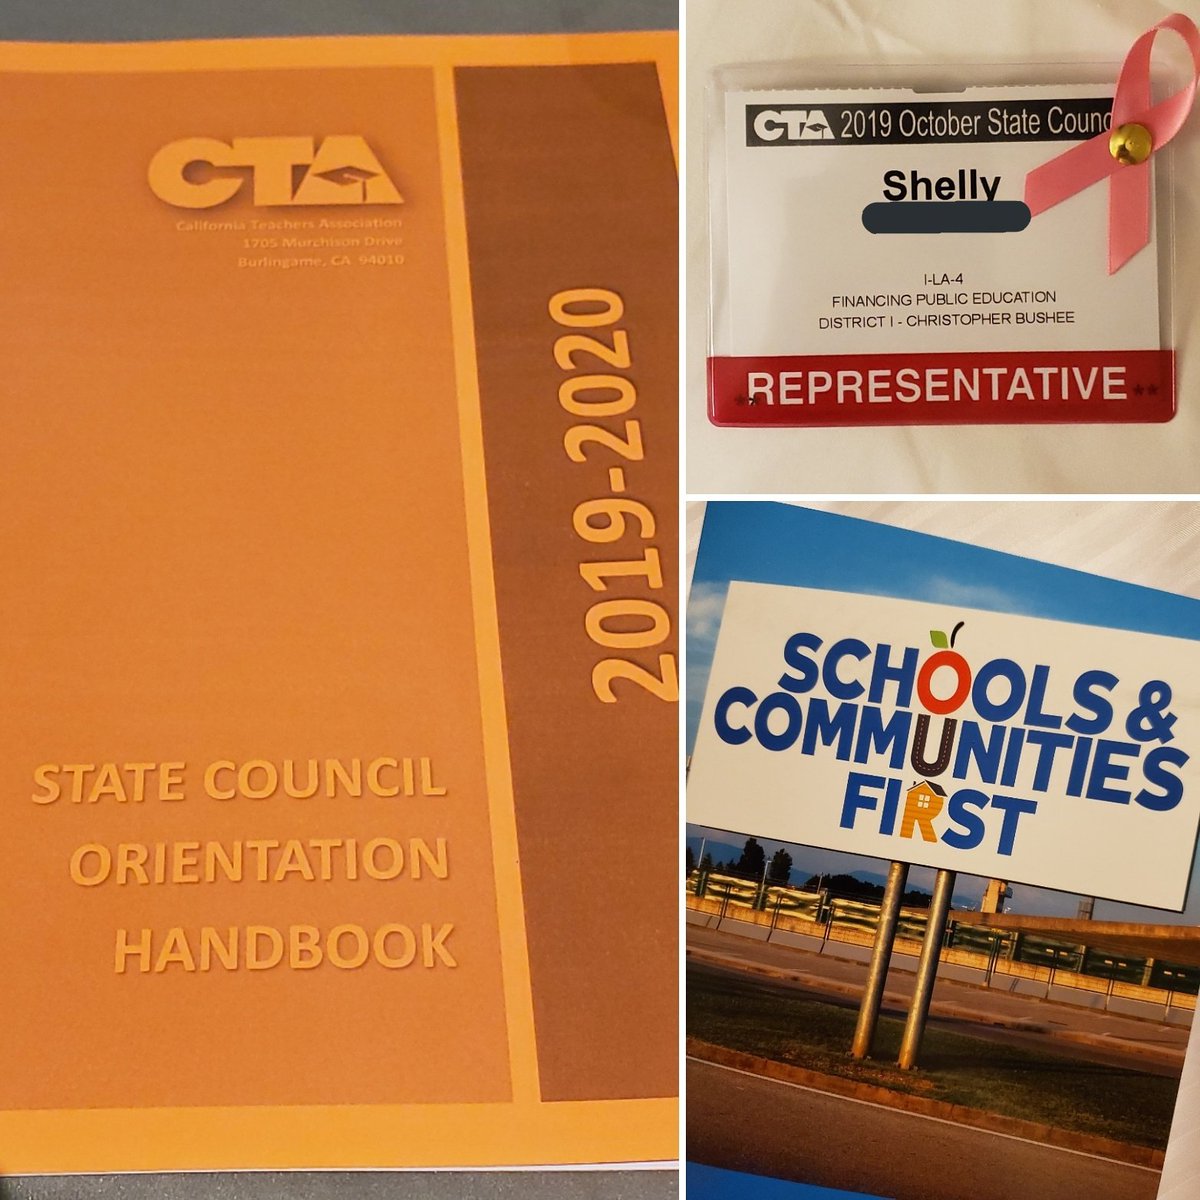 #FridayNight is for learning the ropes at #CTAStateCouncil and dedicating the next 13 months of one's life to getting the #SchoolsAndCommunitiesFirst ballot initiative passed!

#ReformProp13
#WeAreCTA
#WeWillWin 
✊🍎👩‍🏫